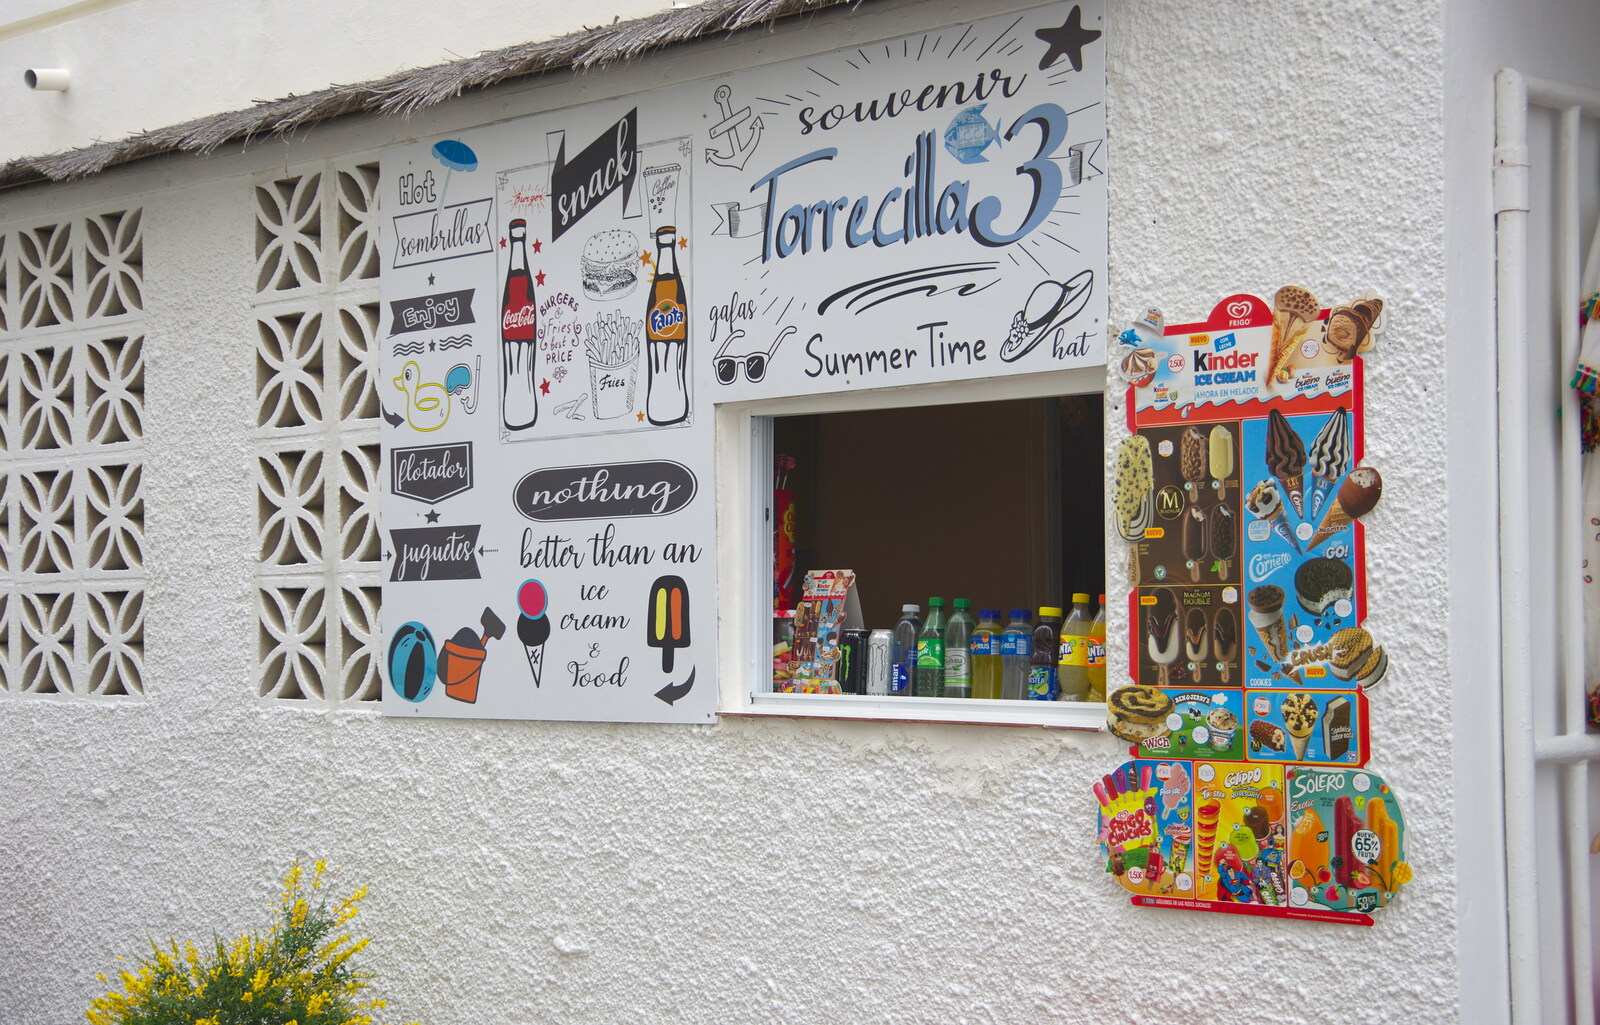 Torrecilla 3 snack bar from Torrecilla Beach and the Nerja Museum, Andalusia, Spain - 17th April 2019